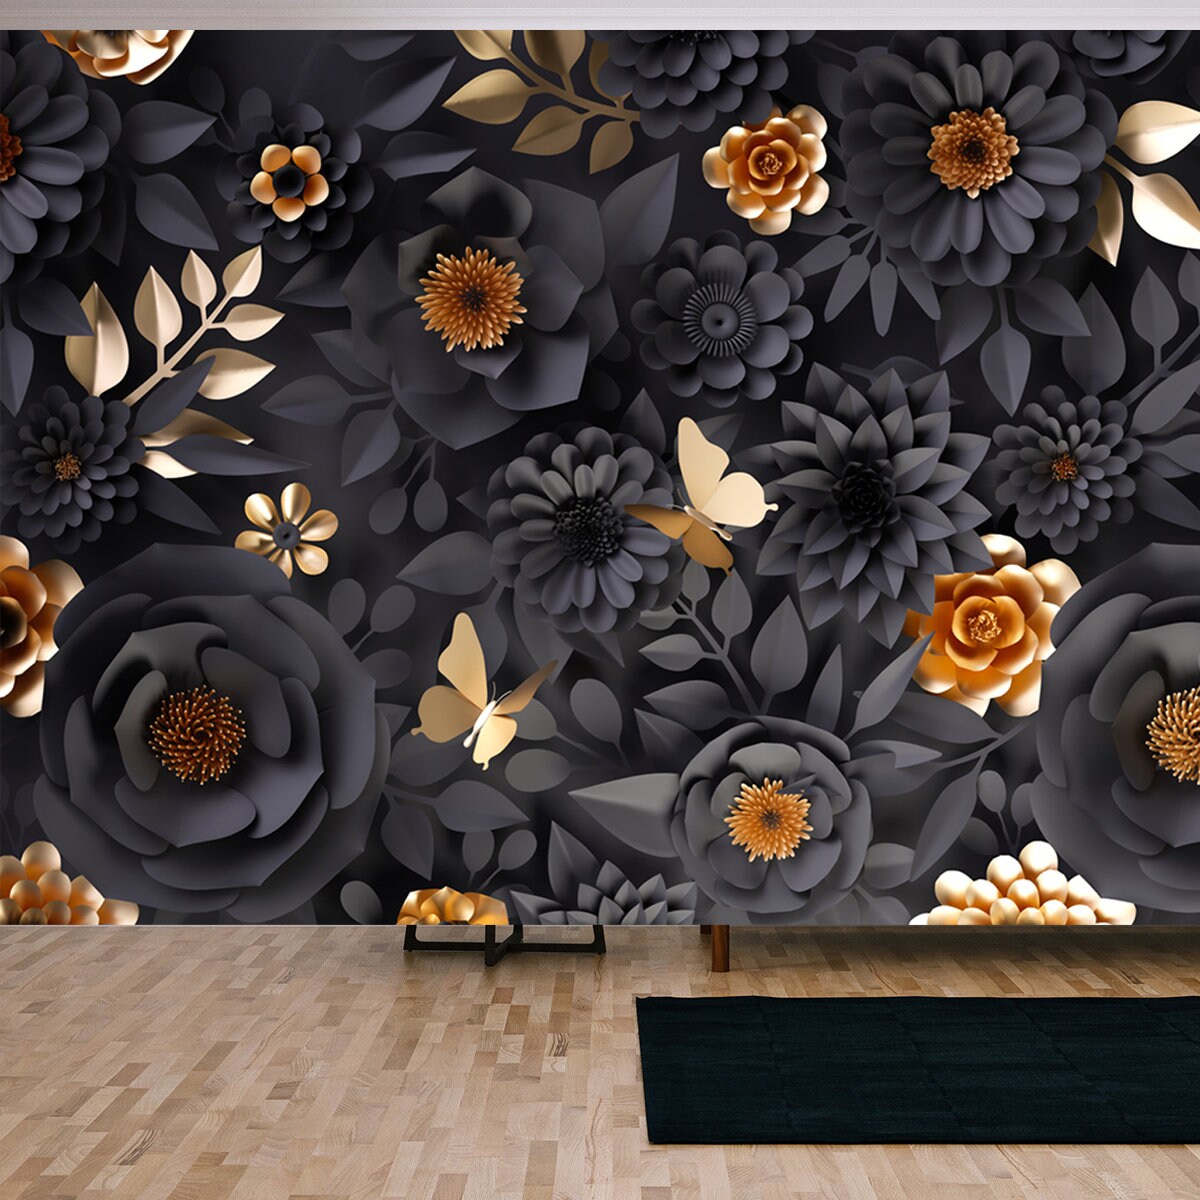 3d Render, Abstract Art Deco Background with Black and Gold Paper Flowers and Leaves, Floral Botanical Wallpaper Living Room Mural